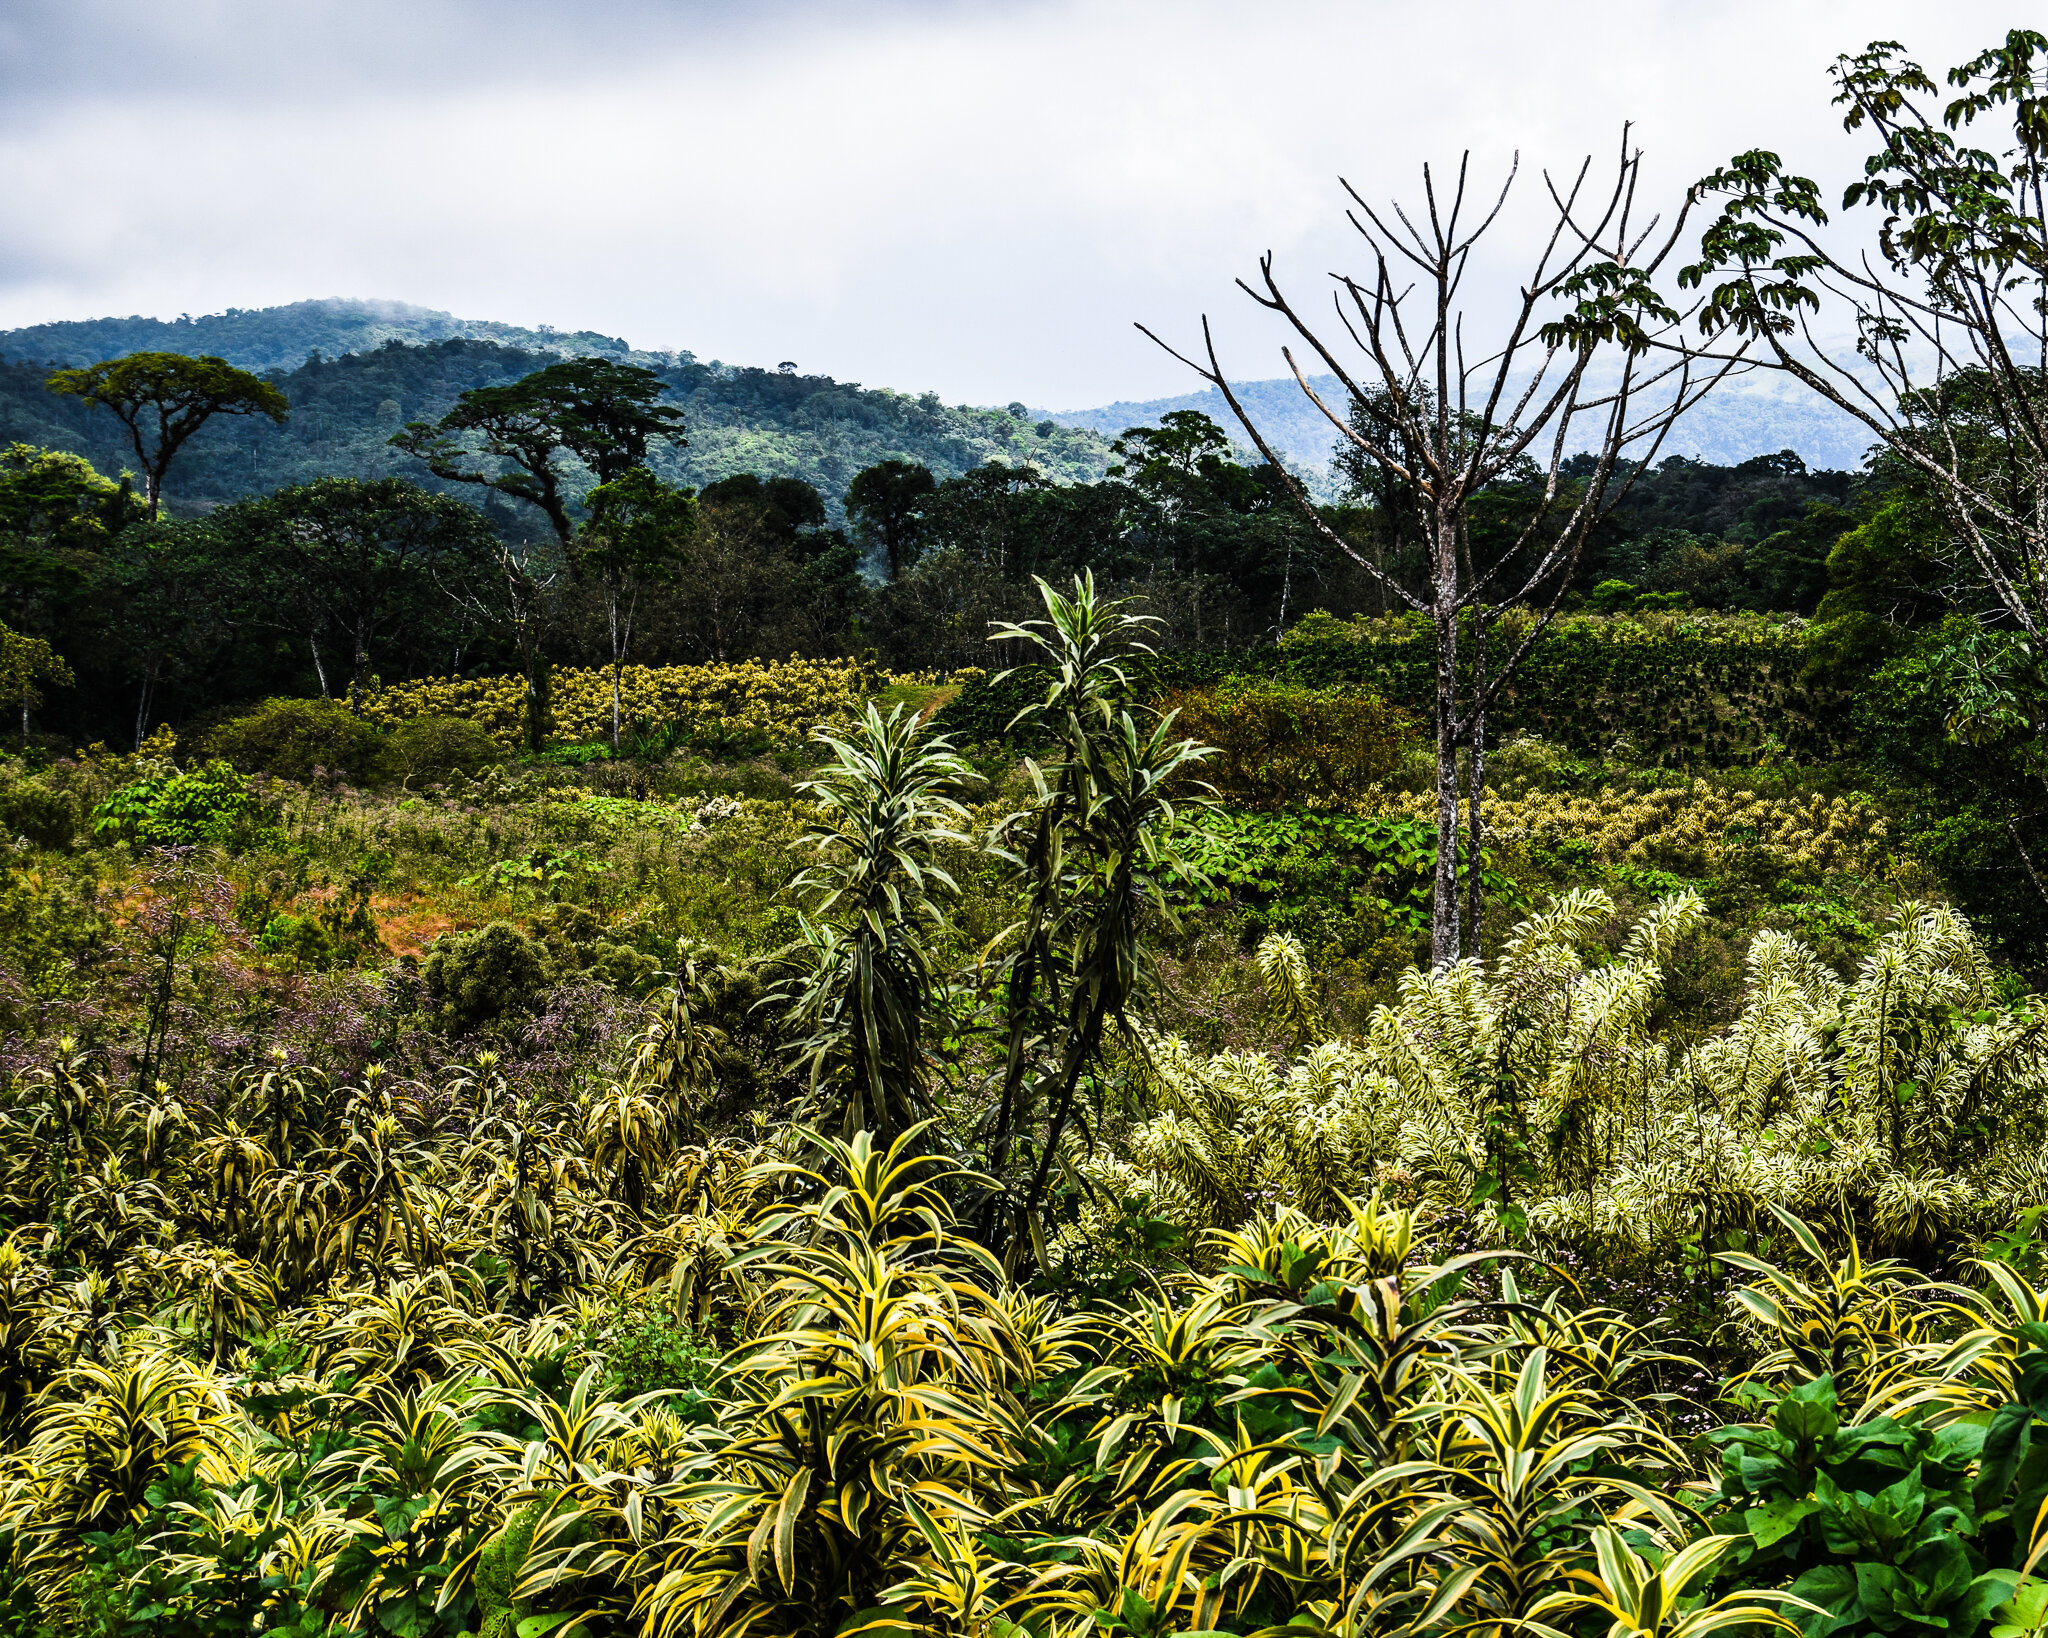 Fields of various Dracaenas in the mountains of Costa Rica